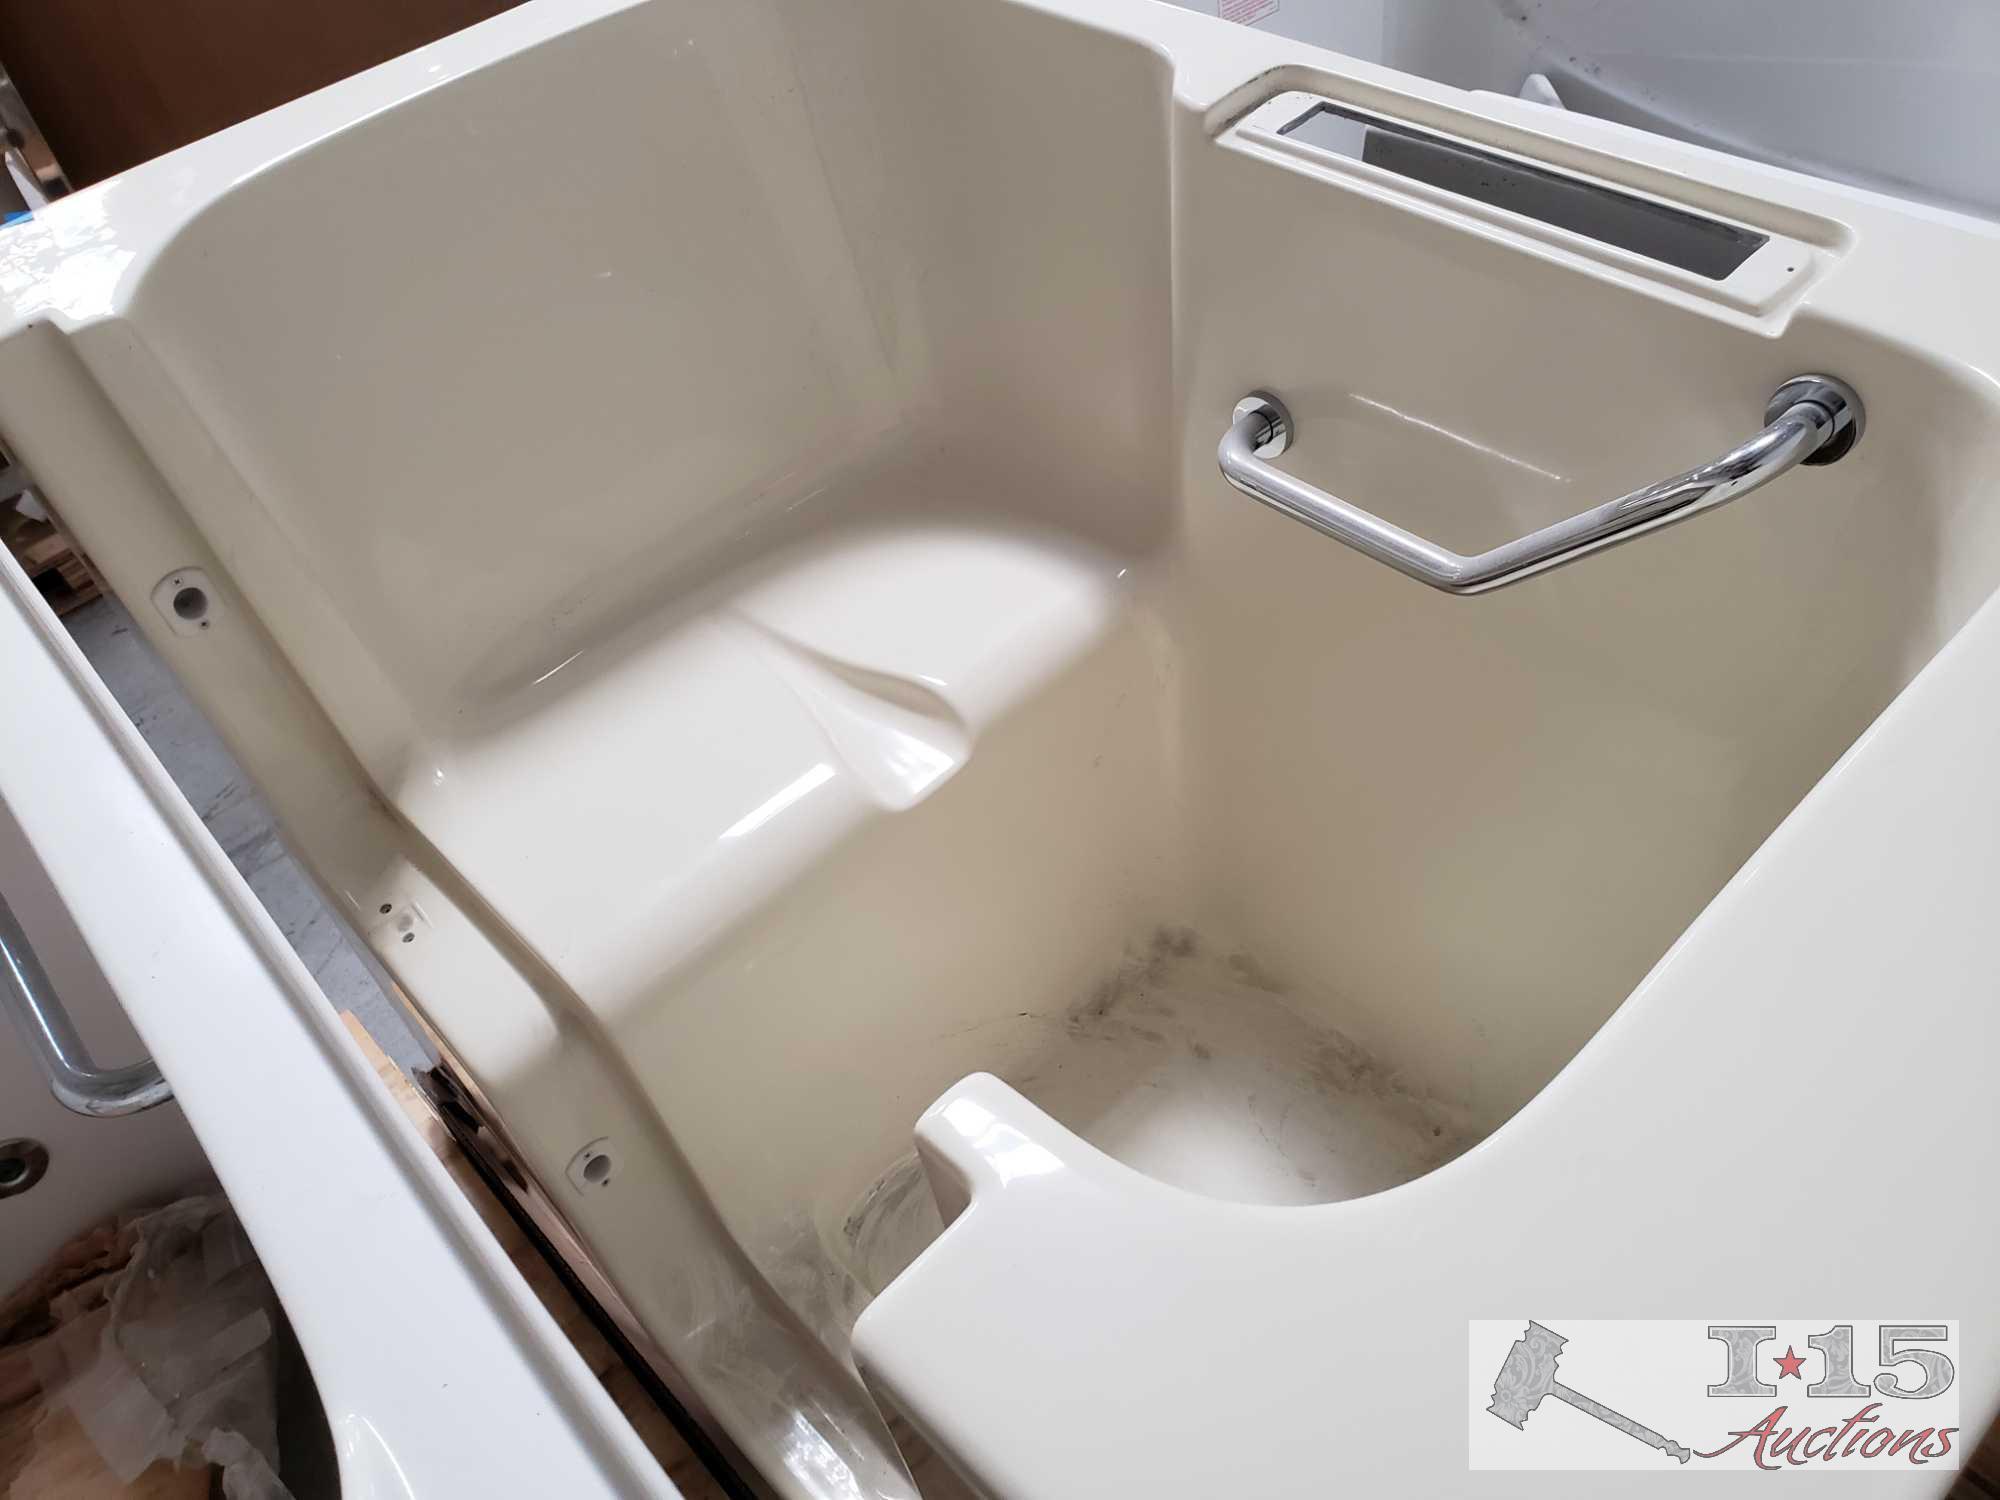 8 Therapy Tubs, Various Models and Sizes